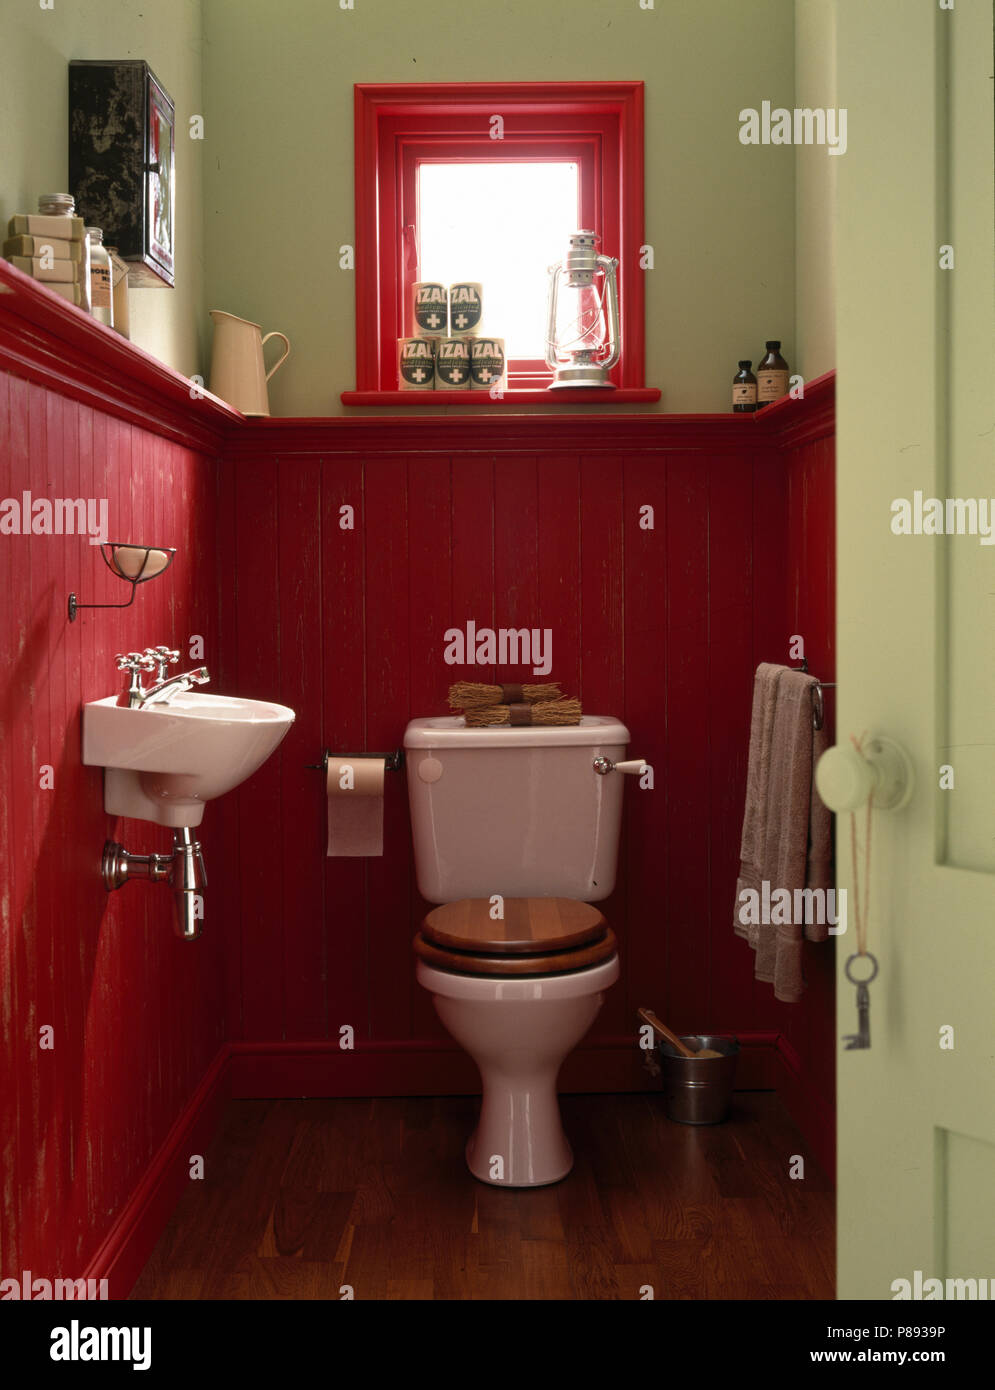 red wooden toilet seat